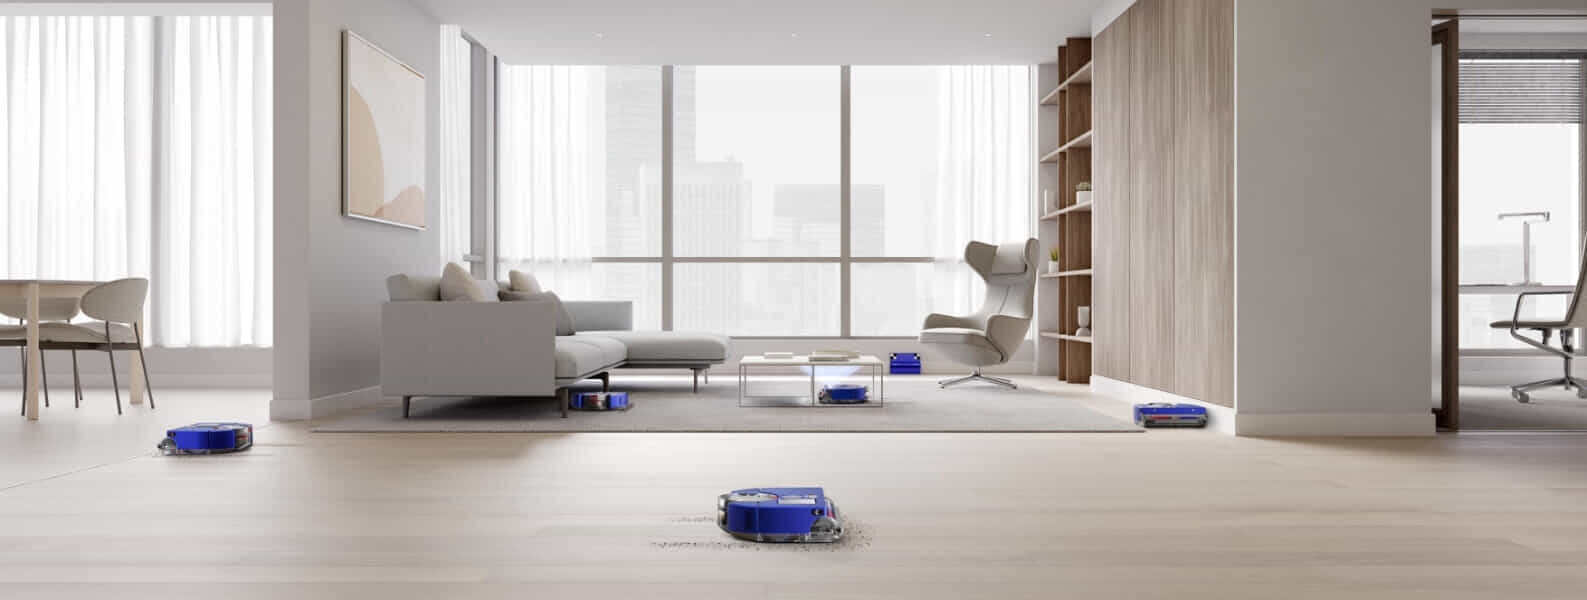 Dyson robot vacuum showcasing how it can clean multiple spots in the one living room.